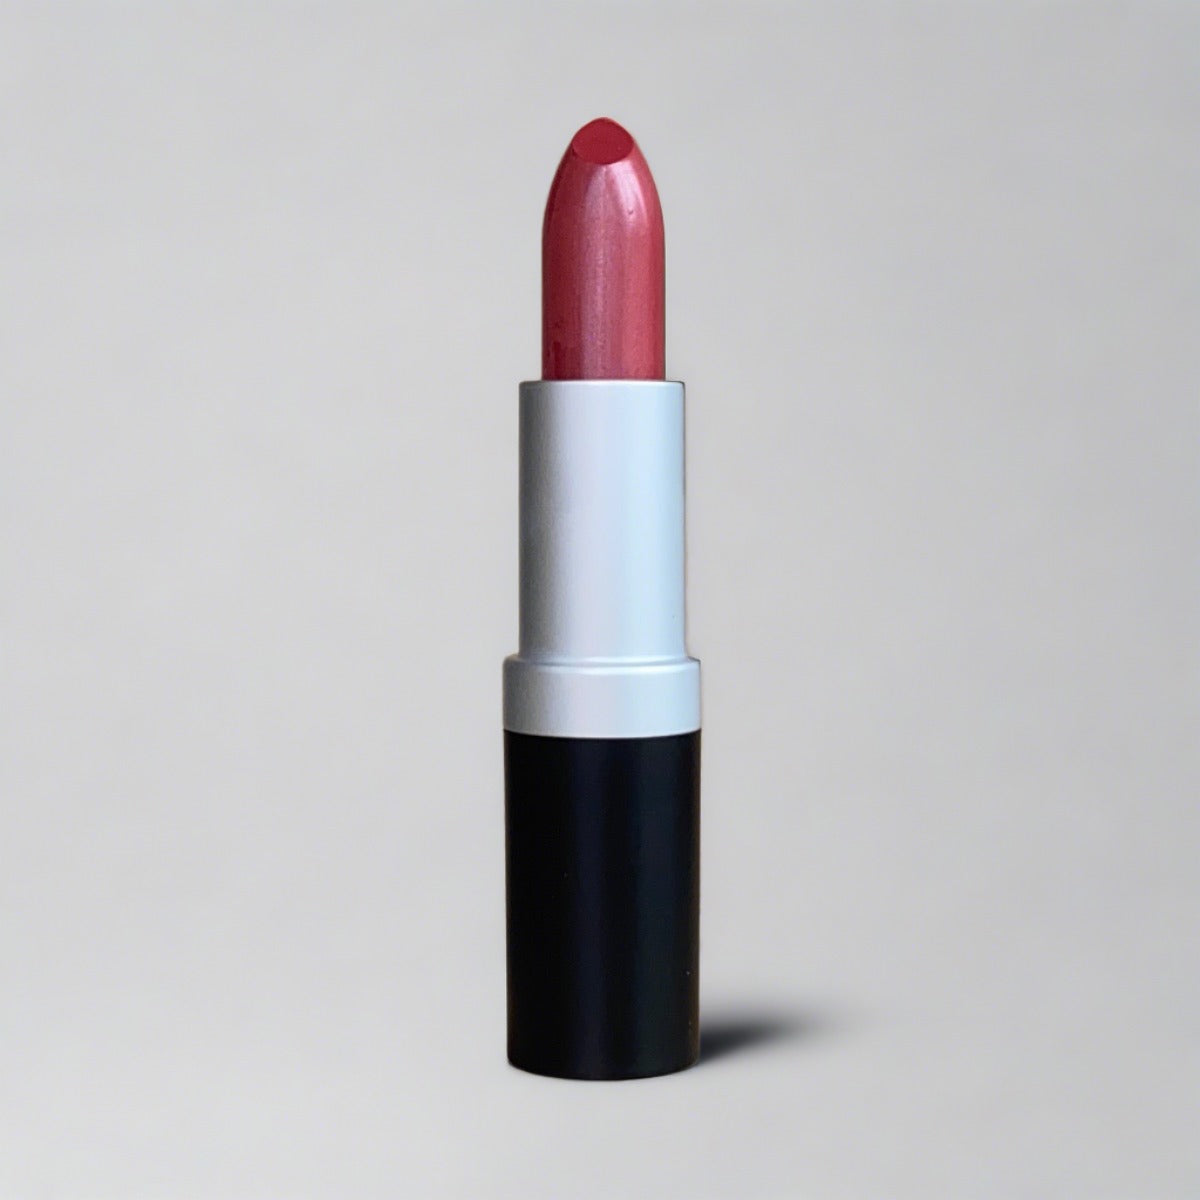 Crushed Rose Lipstick with staying power